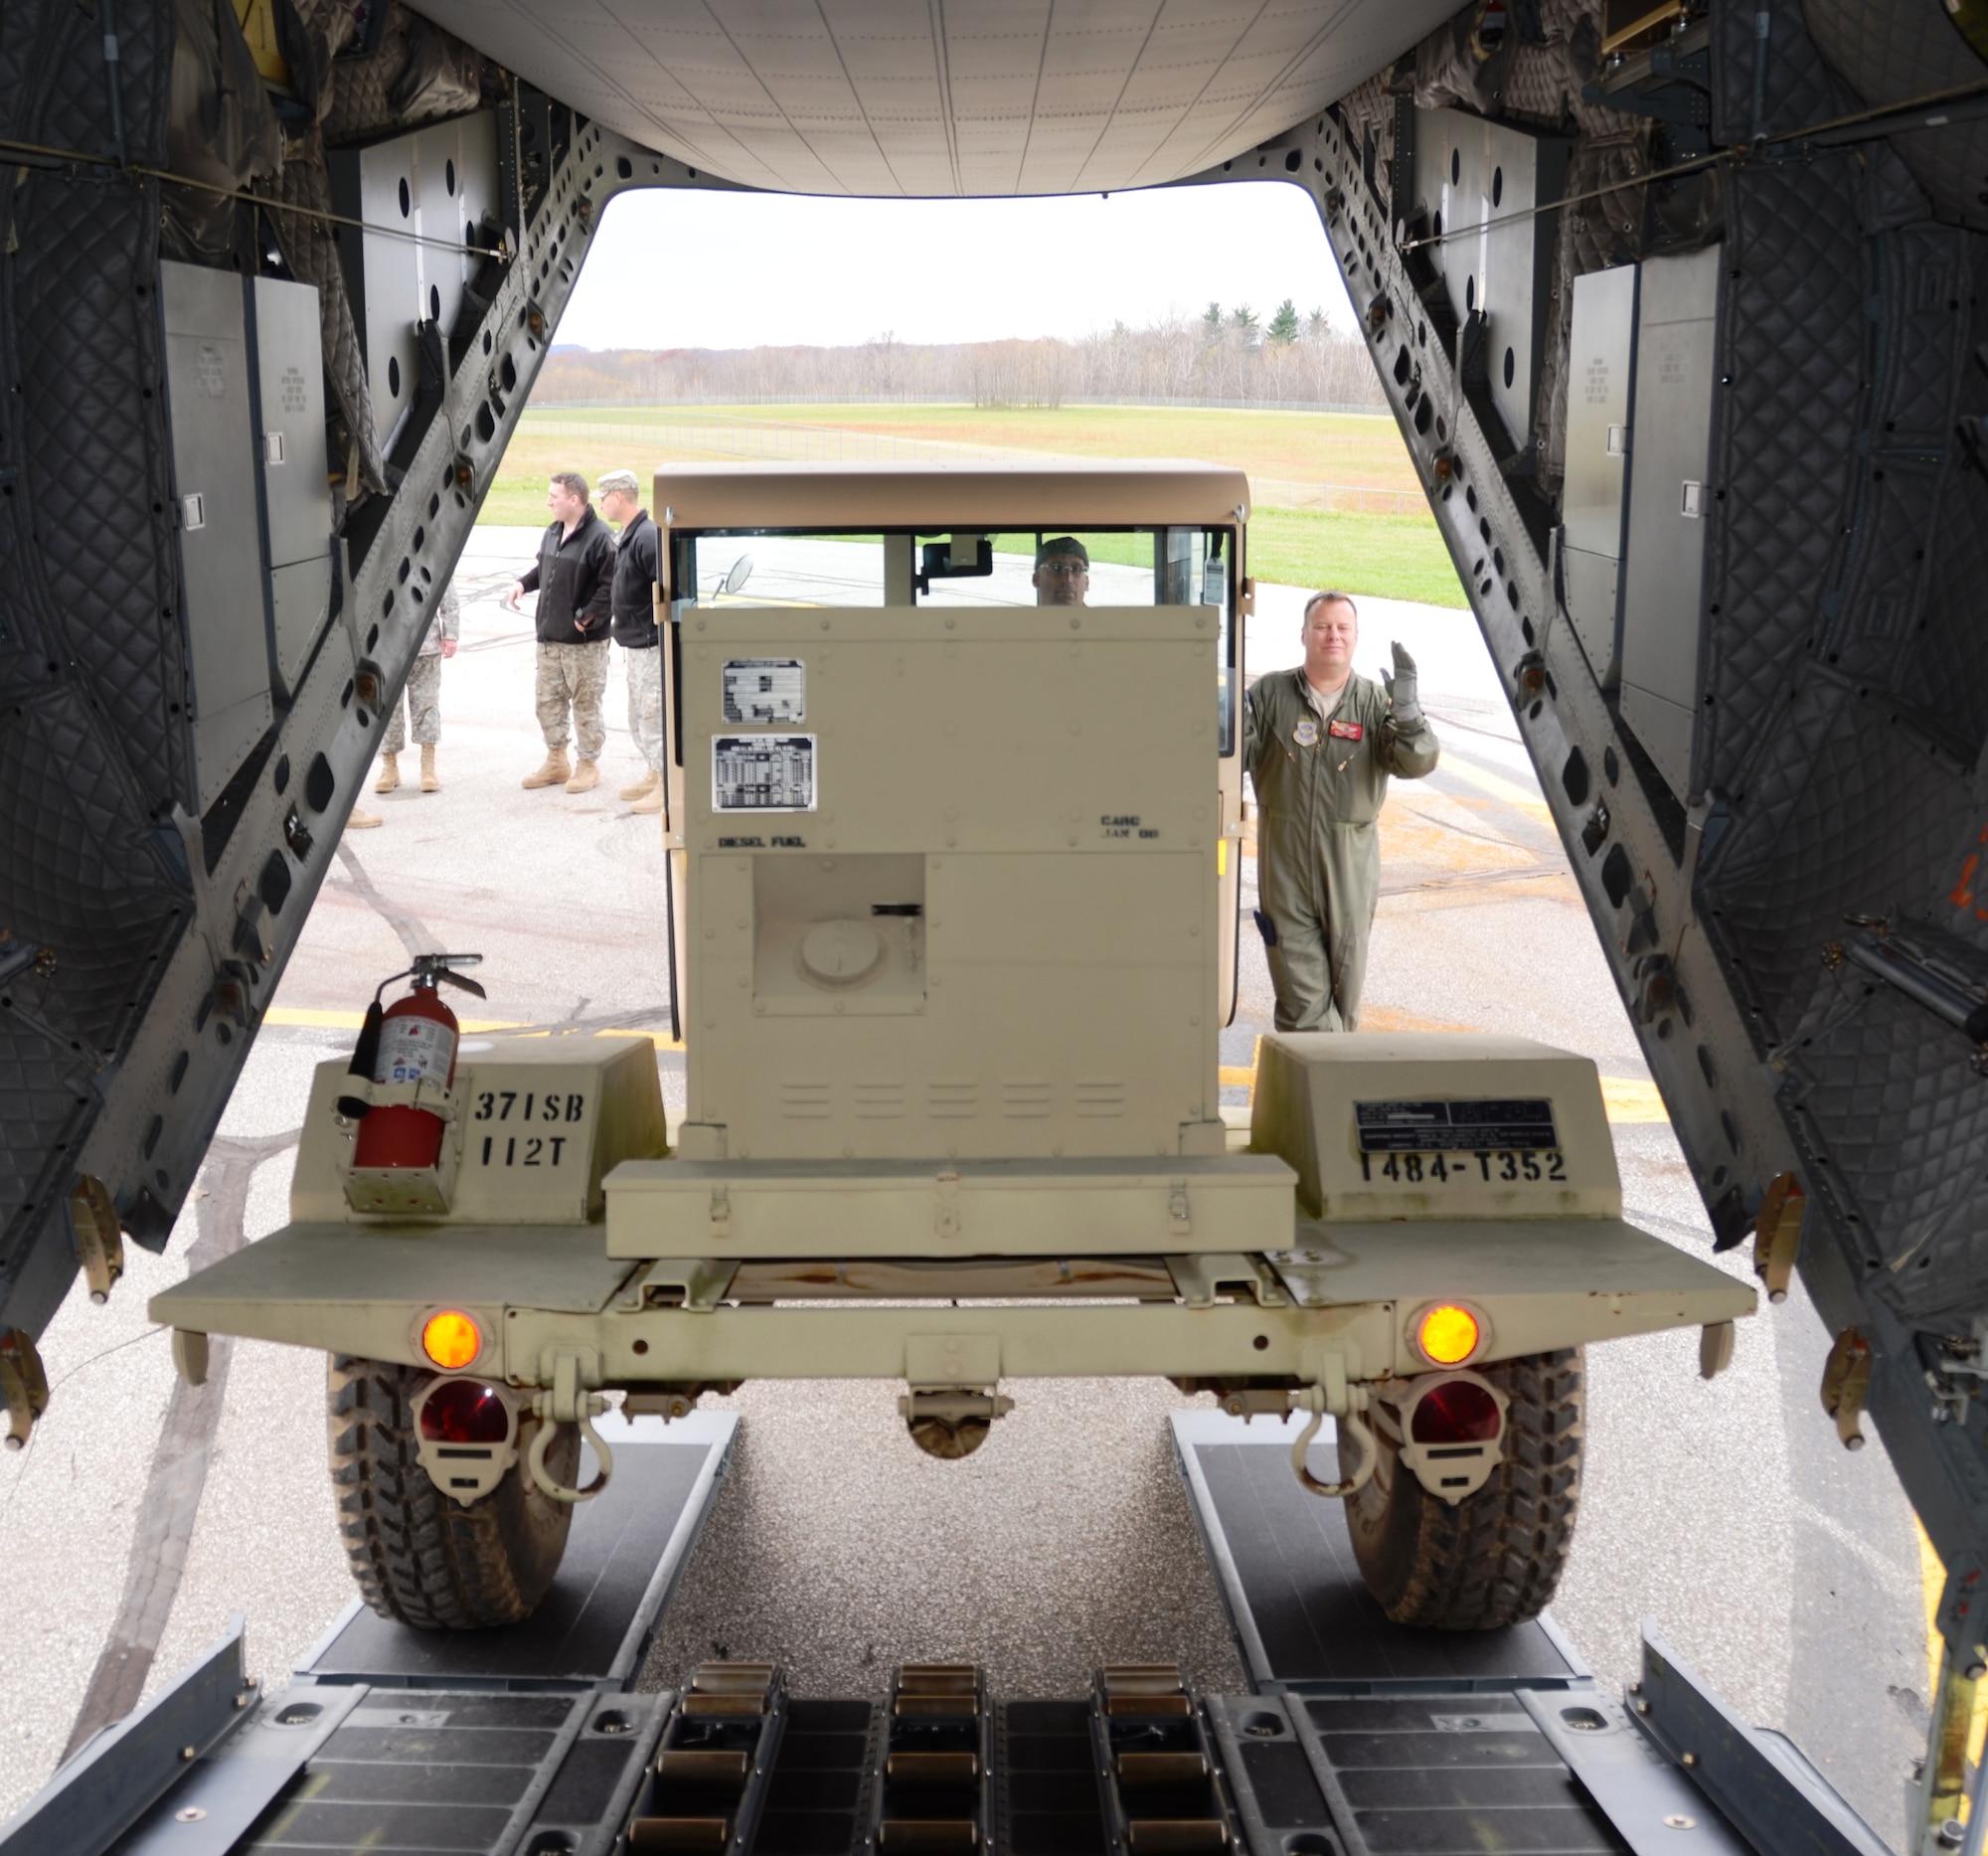 Master Sgt. Matt Kerstetter loads an electrical generator onto a waiting C-27J Spartan at the Akron-Canton Airport in Ohio on Saturday, November 3, 2012. The mission critical equipment is being transported by the Maryland Air National Guard for relief efforts in New York City due to Hurricane Sandy. (National Guard photo by Tech. Sgt. David Speicher)